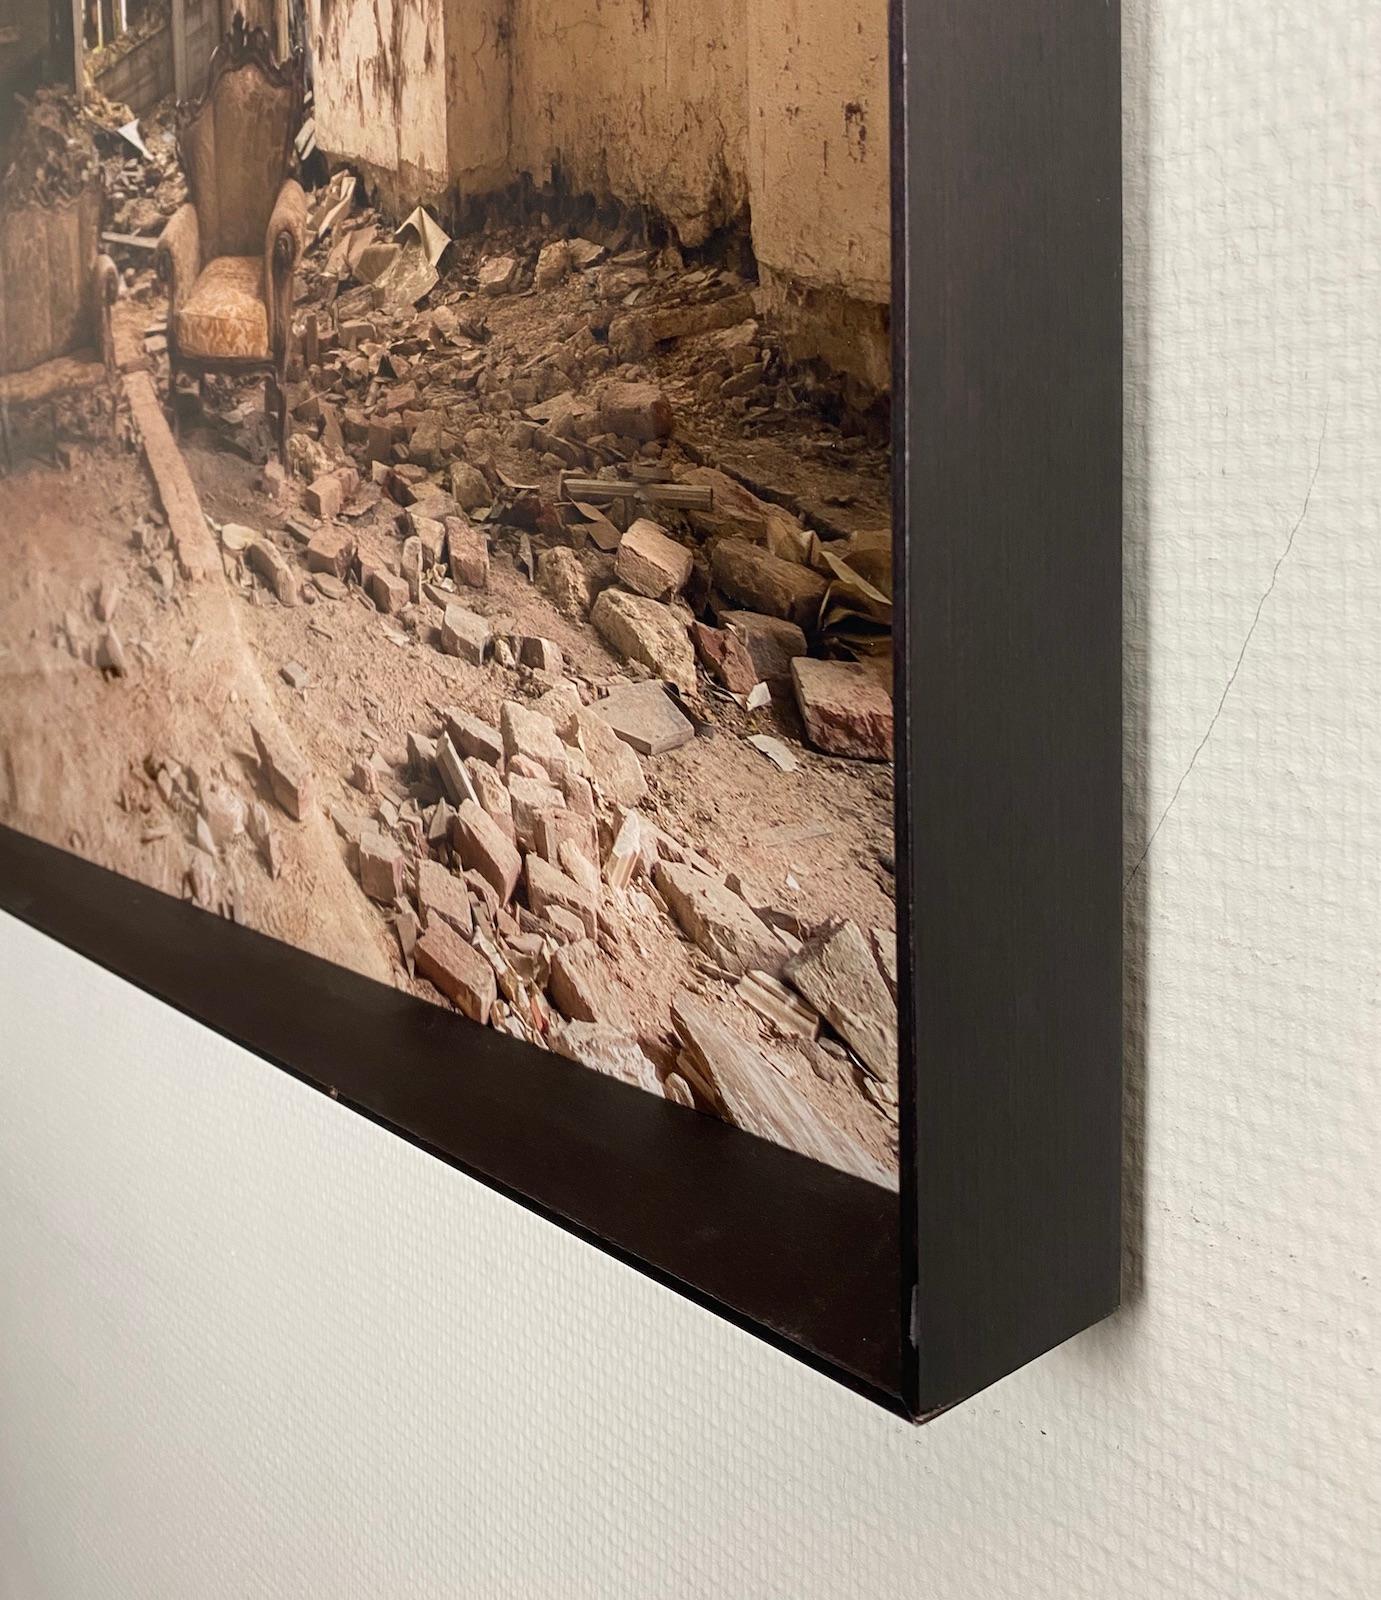 Print mounted on aluminum with plexiglas. Edition of 15.

Dimitri Bourriau is a French photographer, he has always been interested in history and architectural remains. He explores the ruins of the past and observes the decline of time on